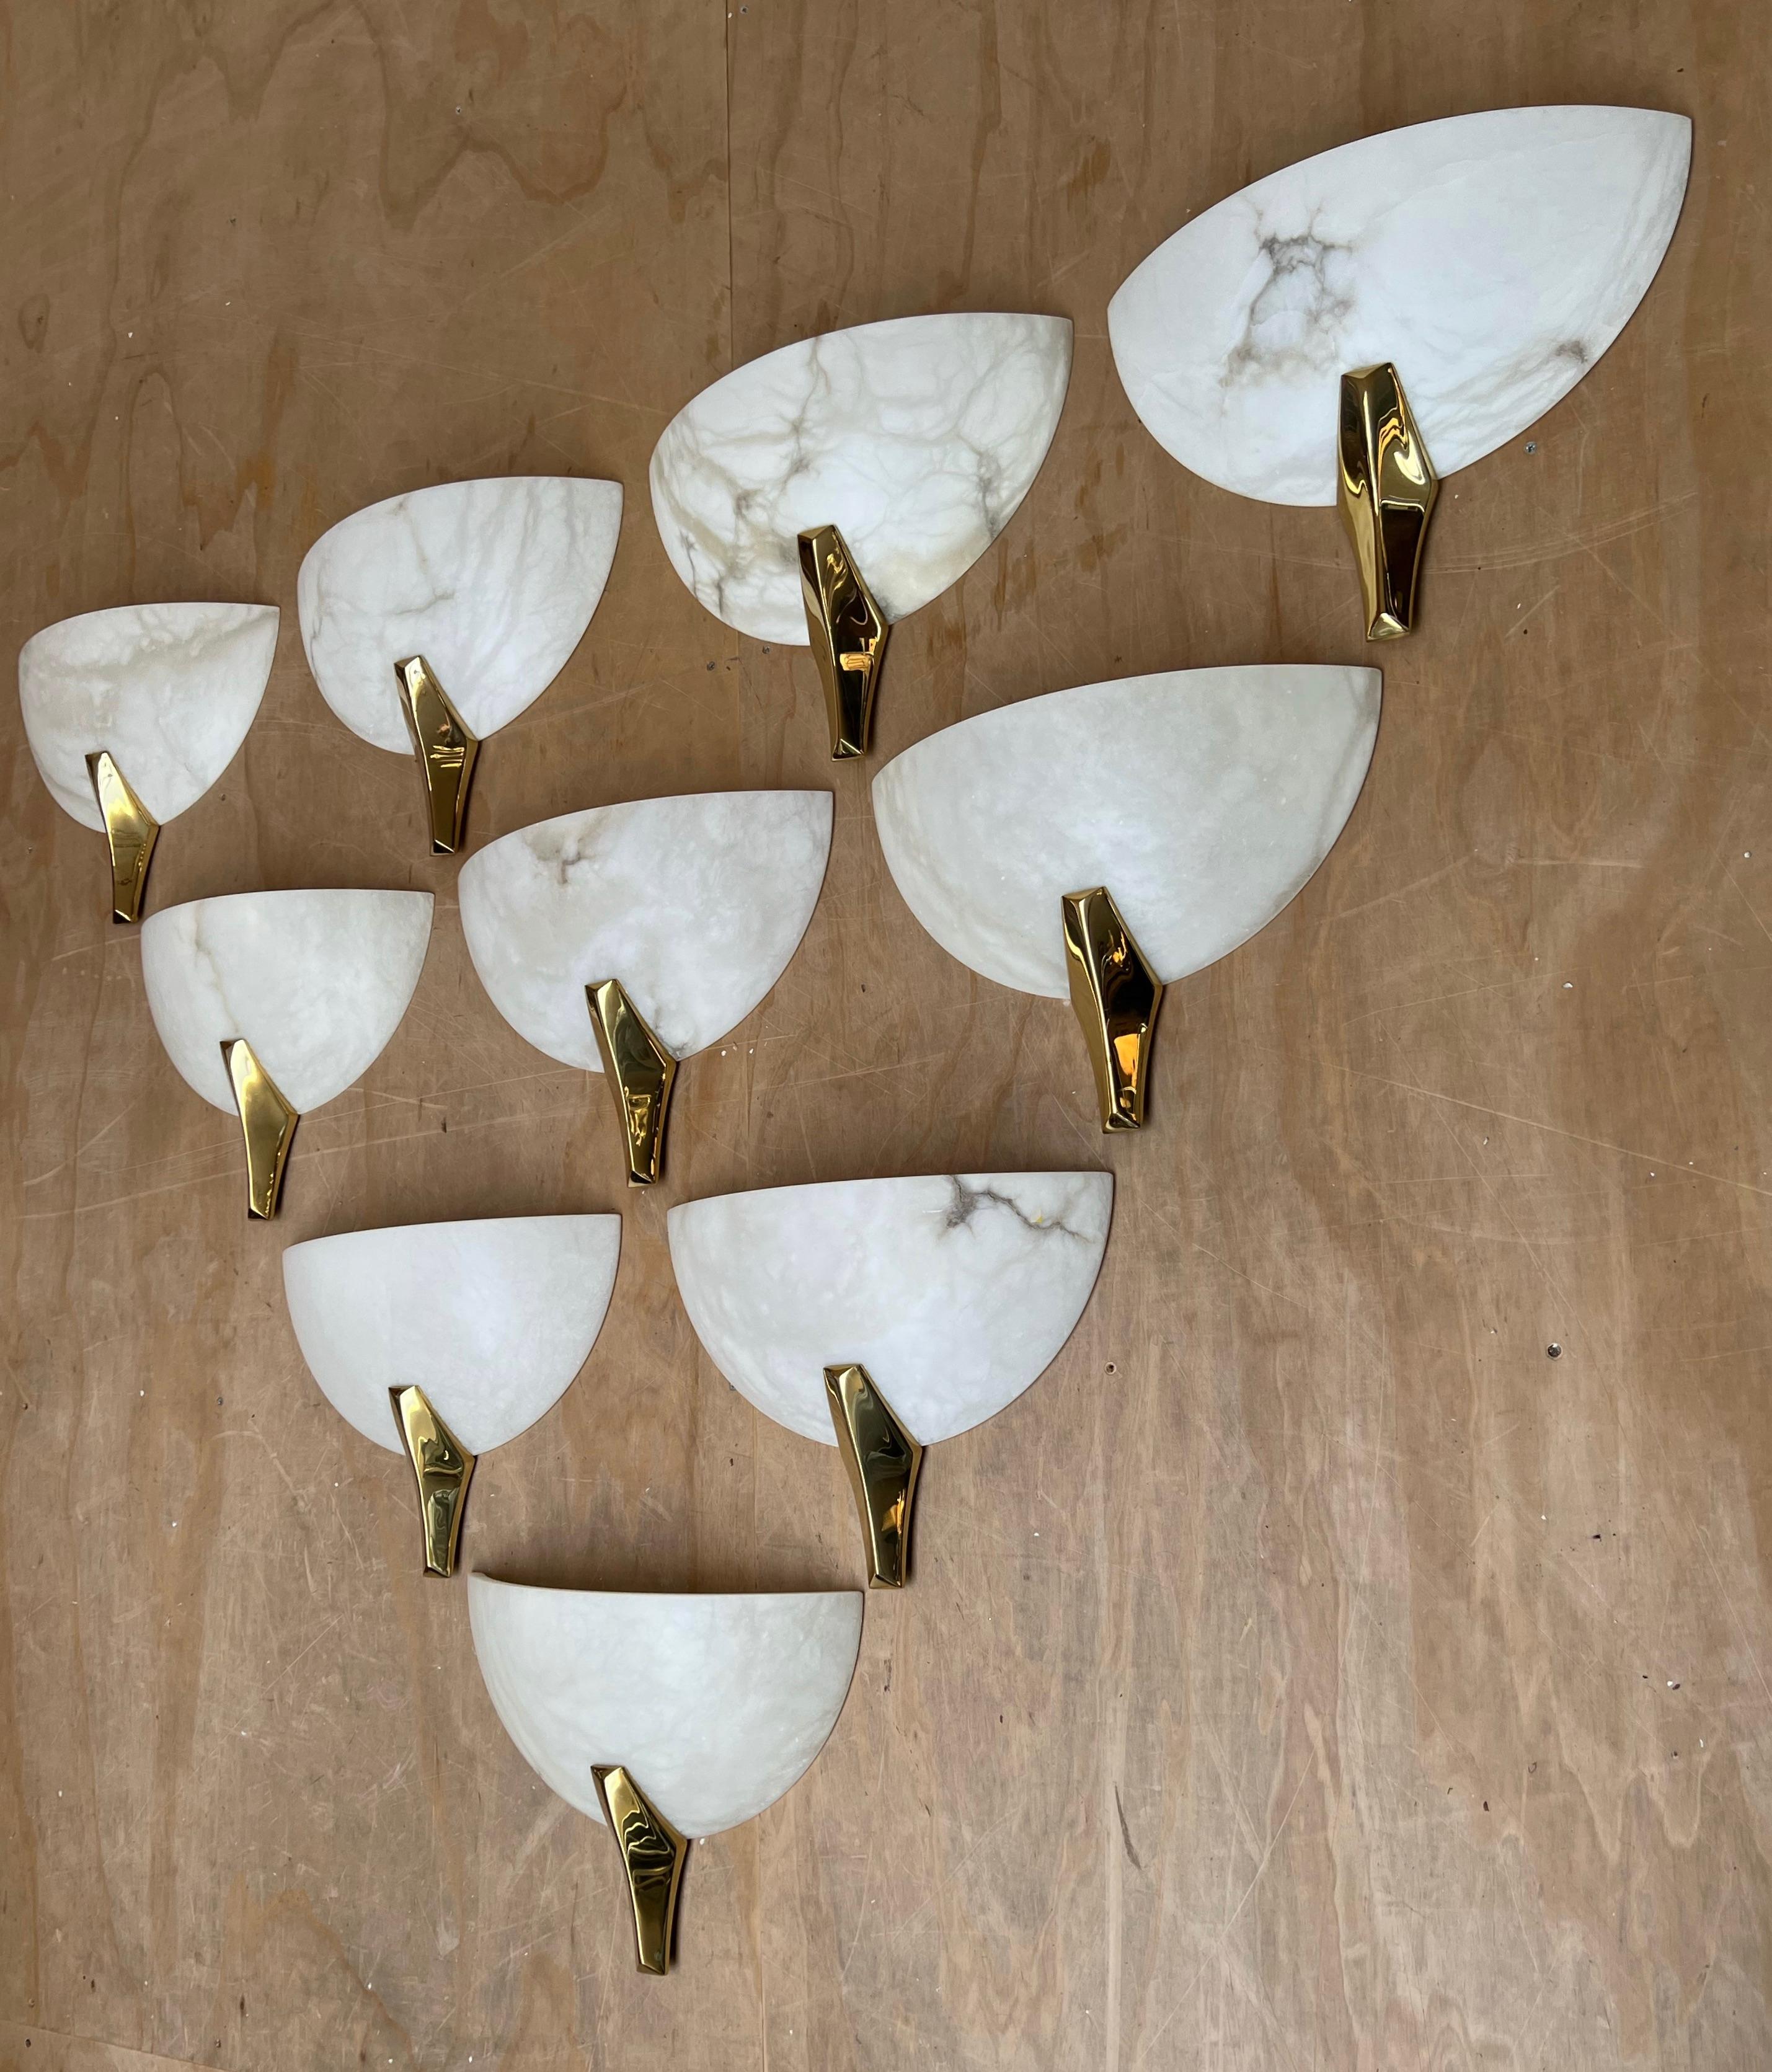 Ideal collection of 10 large alabaster wall lamps for a project.

Because of their timeless designs and warm light creating qualities, we have owned and sold many alabaster light fixtures. There is something about the look and feel of these